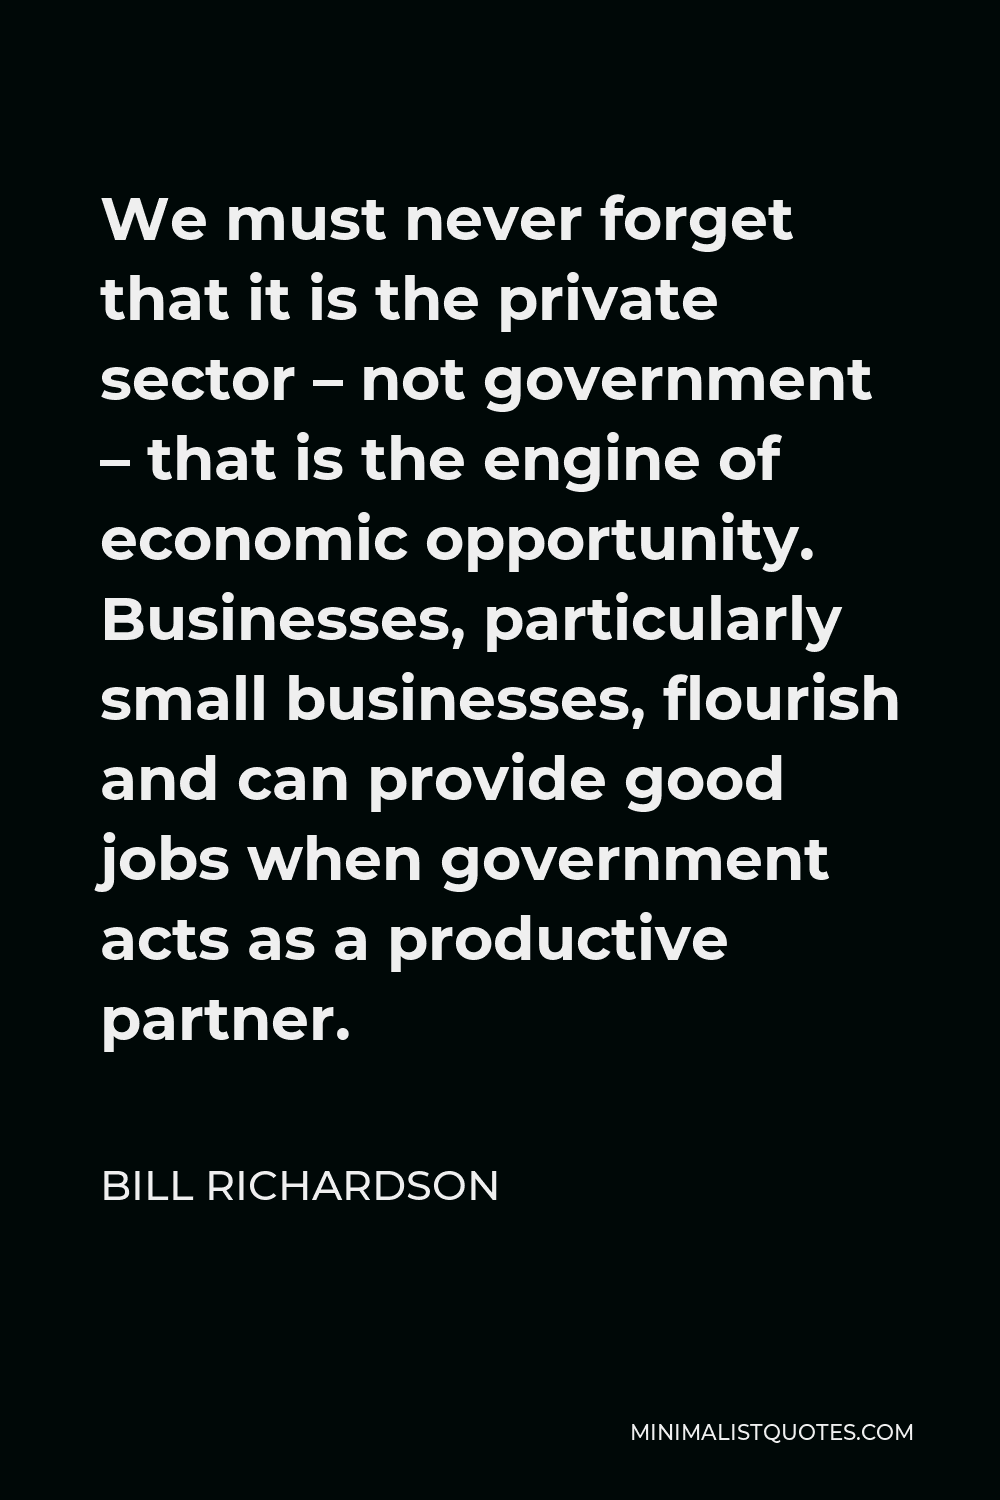 Bill Richardson Quote - We must never forget that it is the private sector – not government – that is the engine of economic opportunity. Businesses, particularly small businesses, flourish and can provide good jobs when government acts as a productive partner.